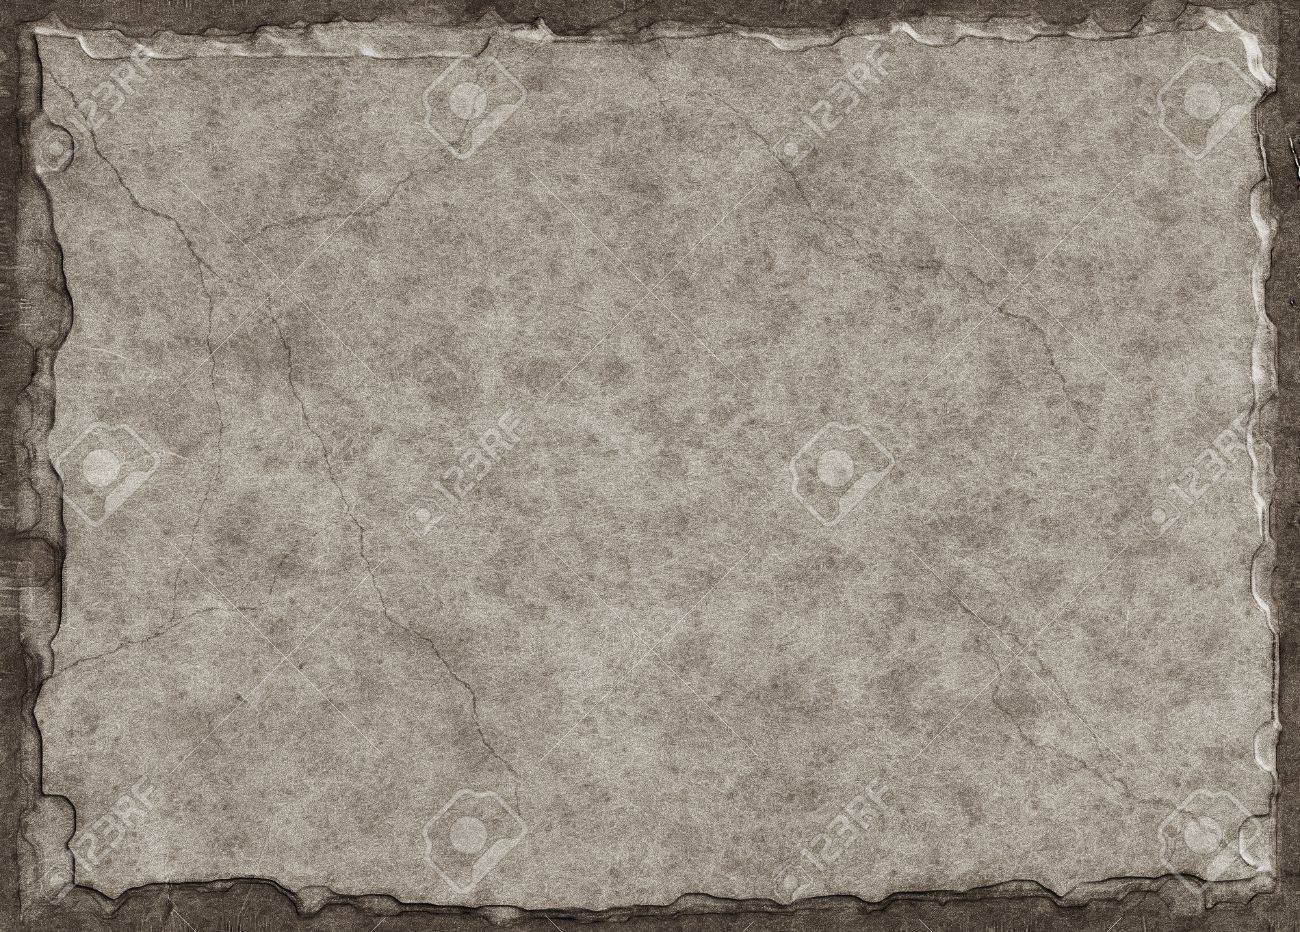 10032612-old-paper-made-to-look-like-a-stone-tablet-with-a-three-dimensional-look-and-subtle-crack-lines-.jpg